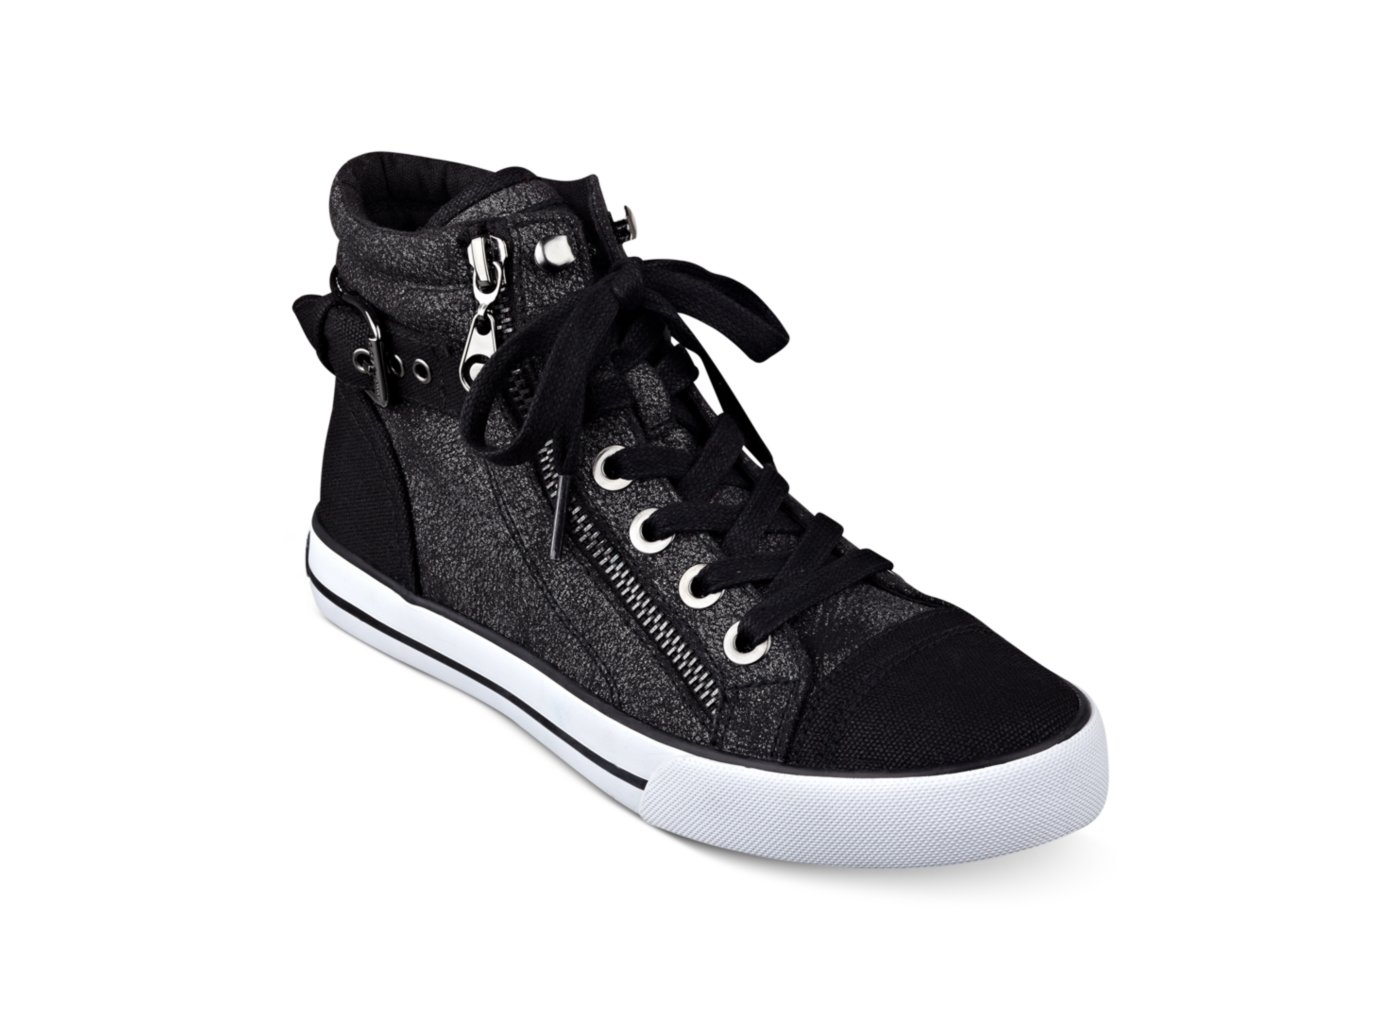 G By Guess Women's Olama High Top Sneakers